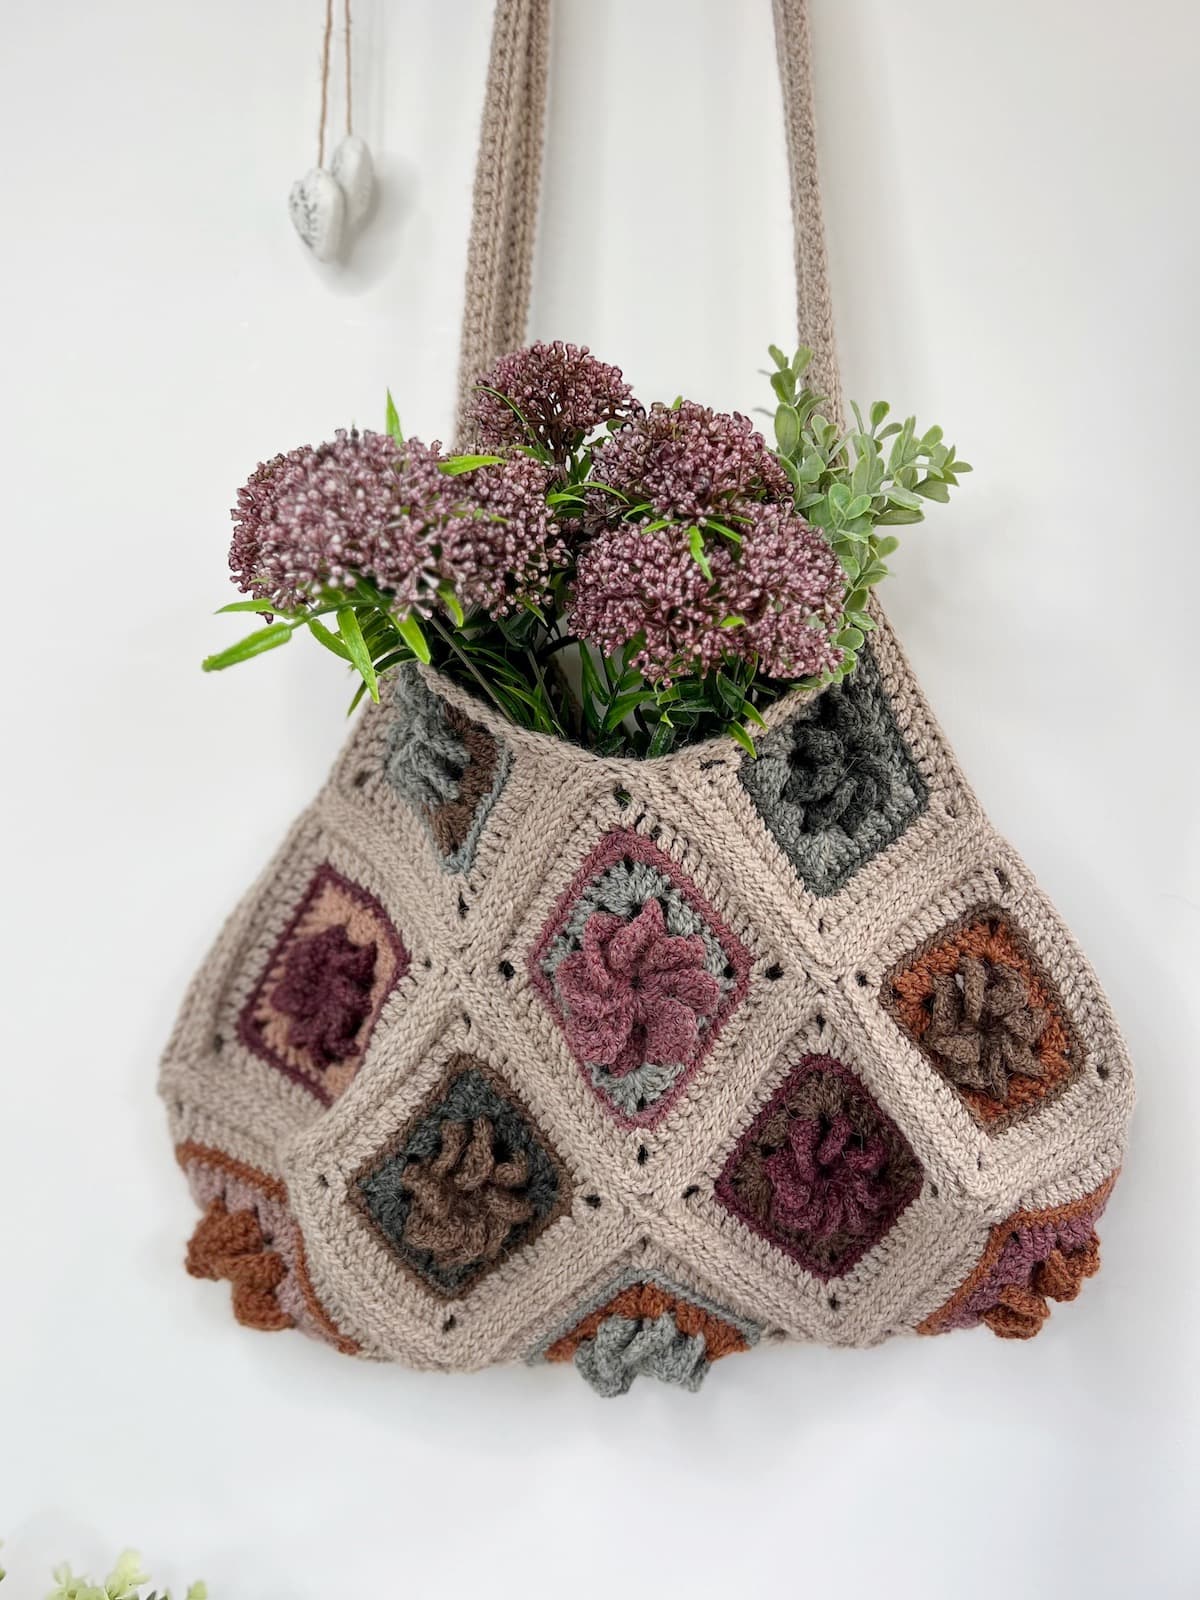 A crocheted bag with flowers hanging from it.